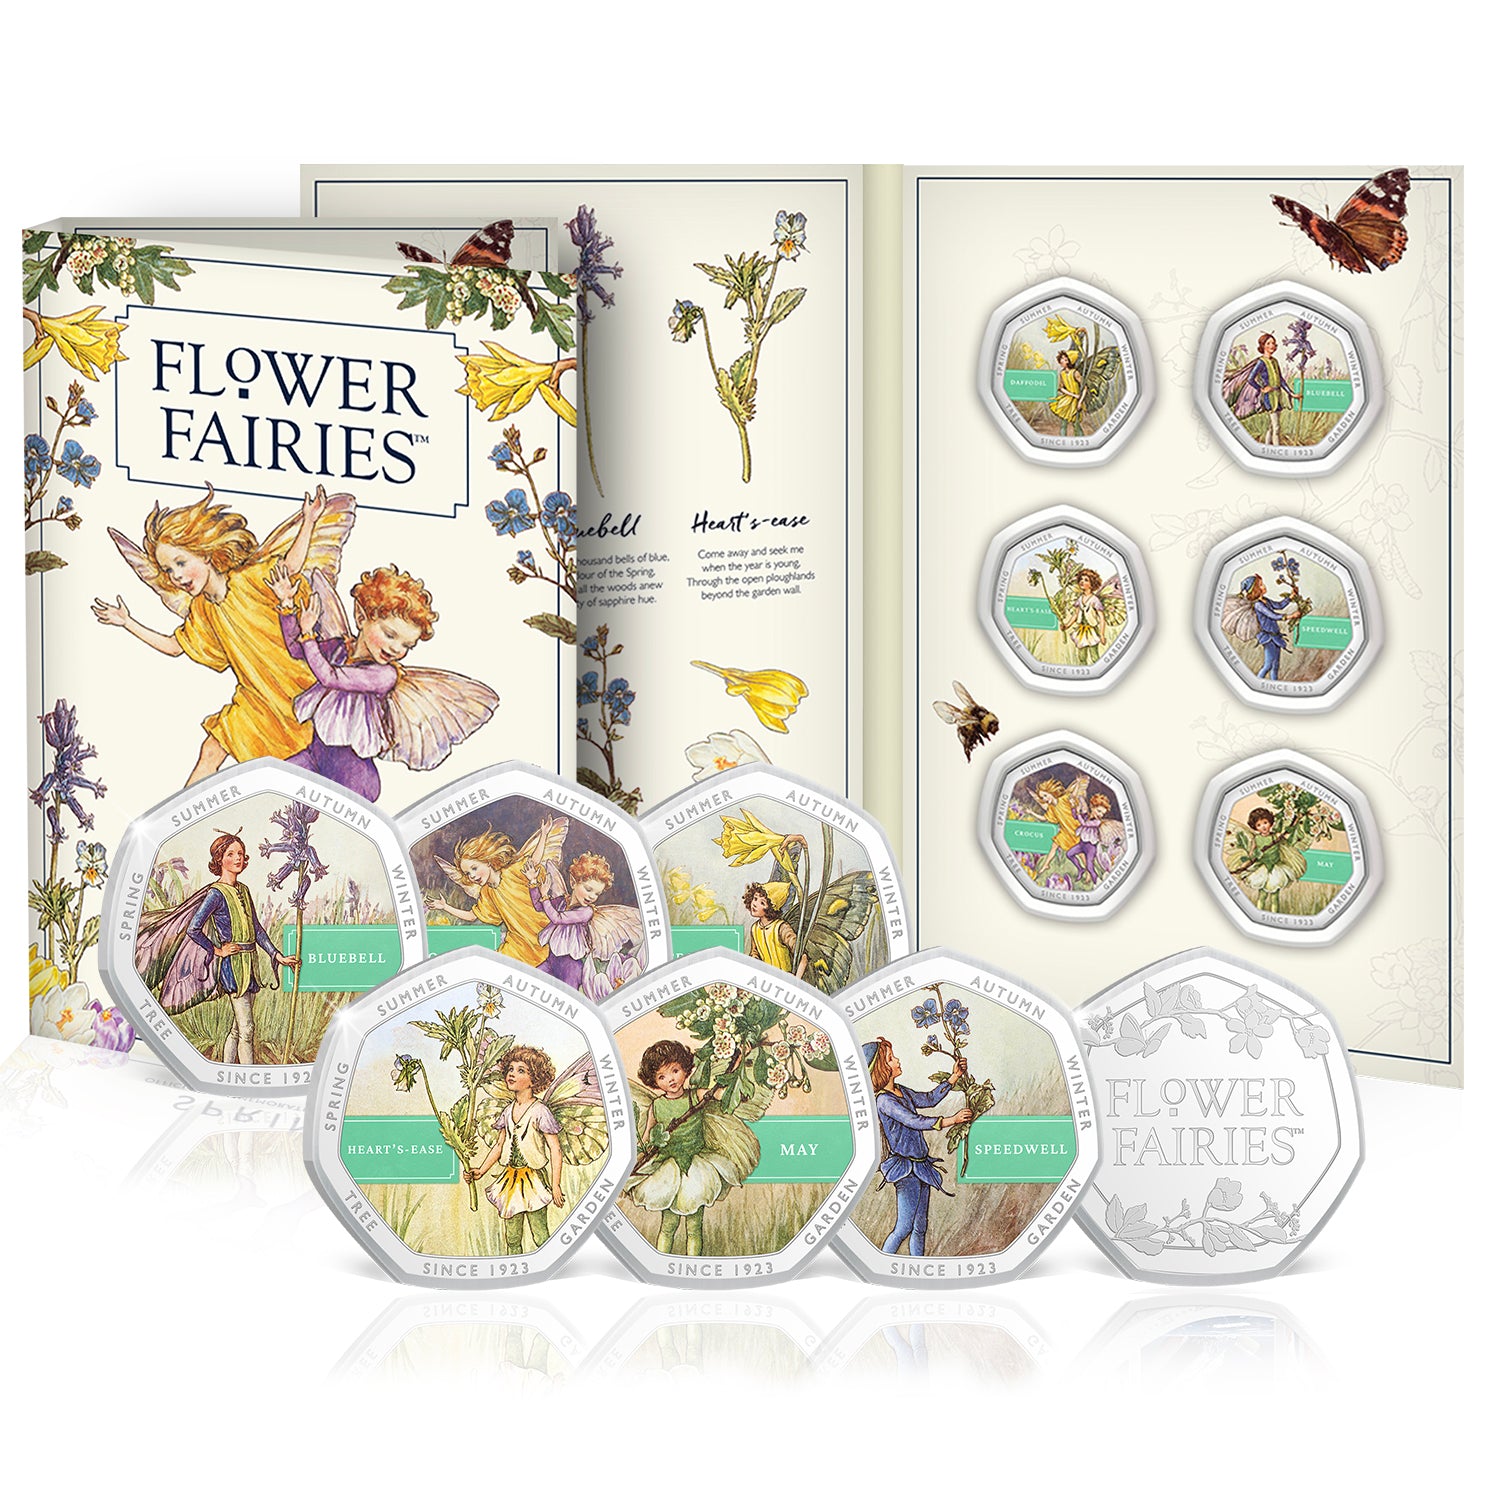 The Flower Fairies Spring Collection Volume I